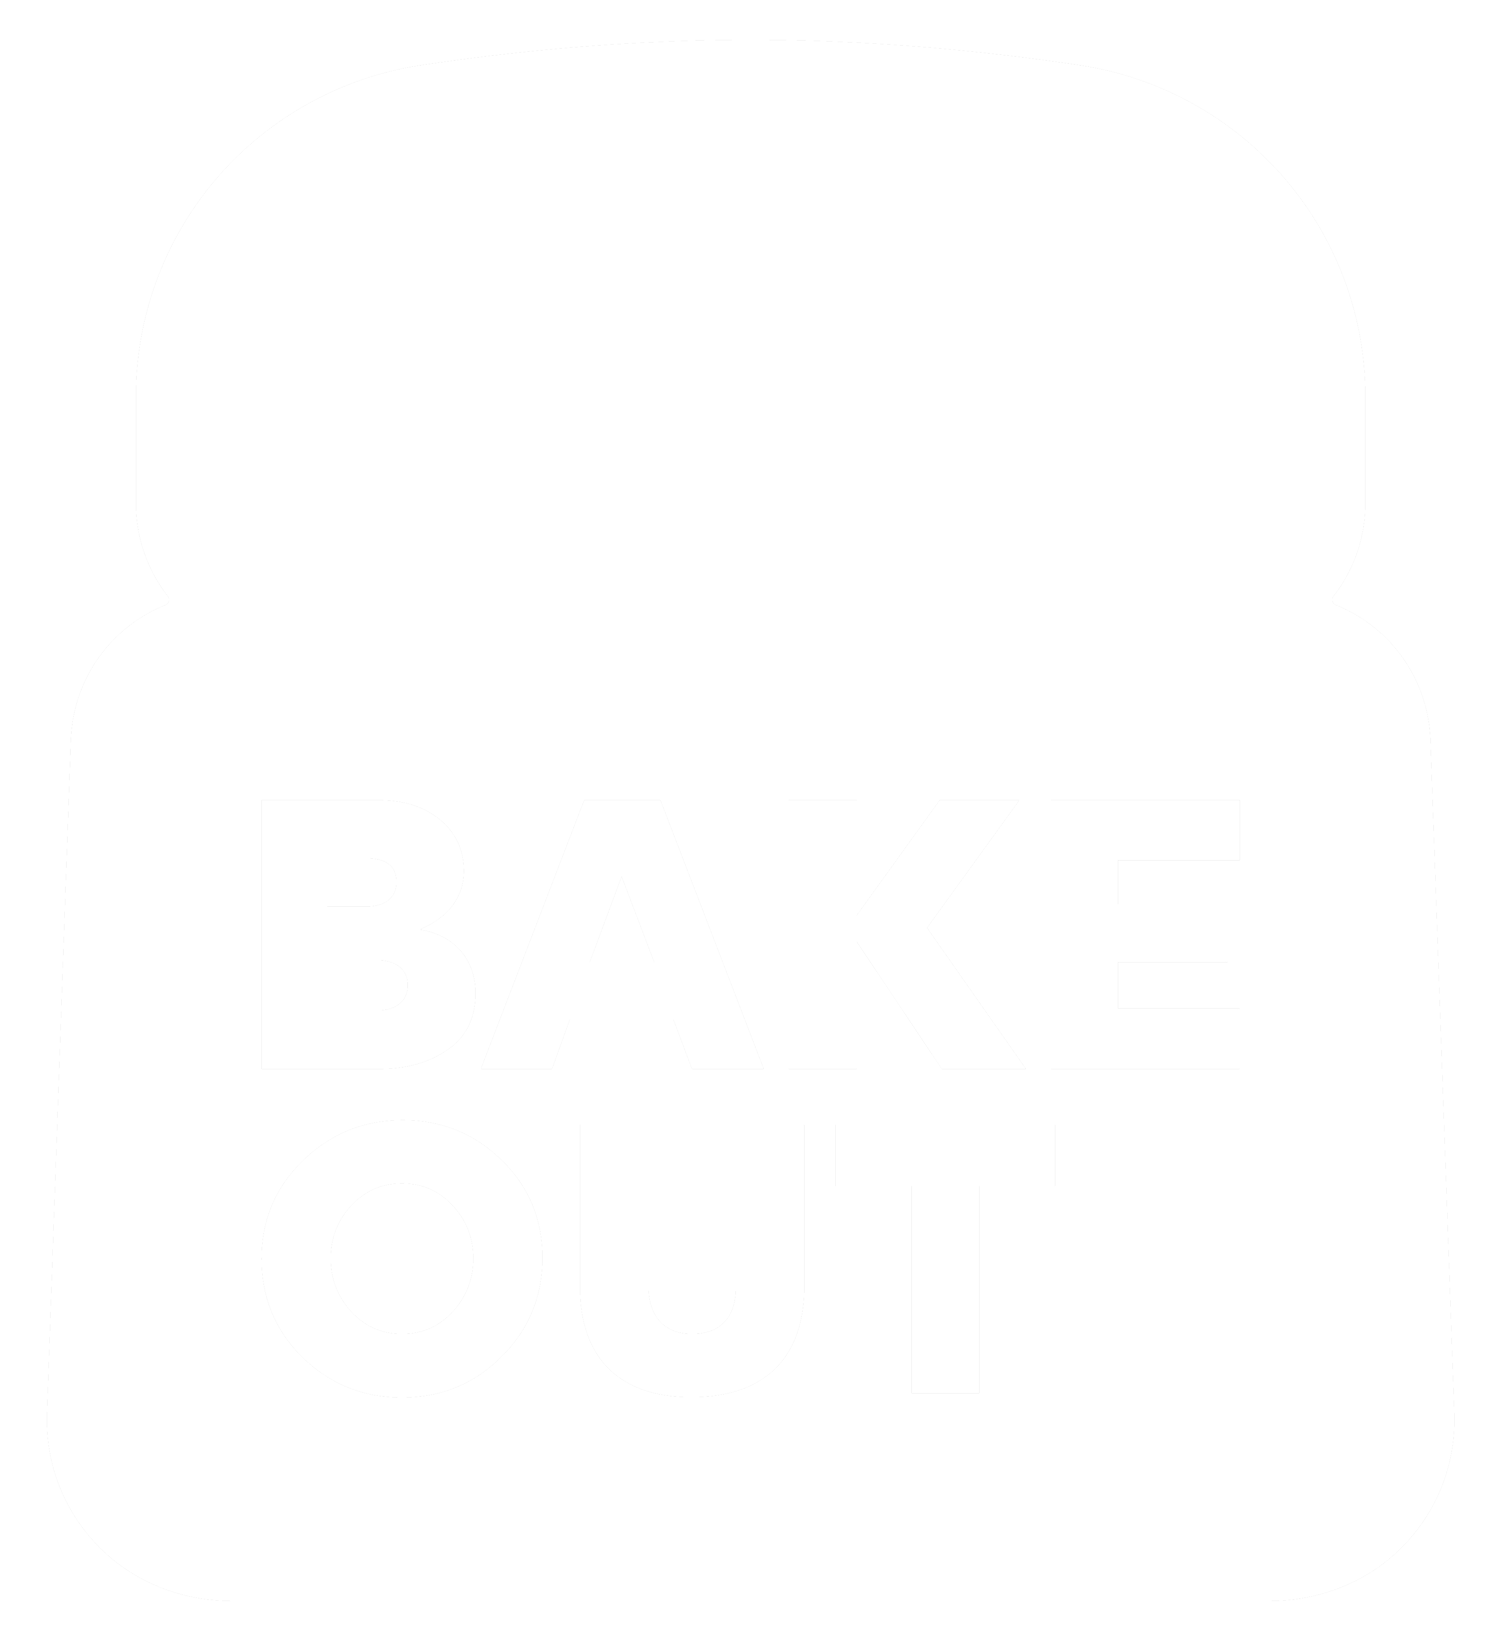 BAKE OUT